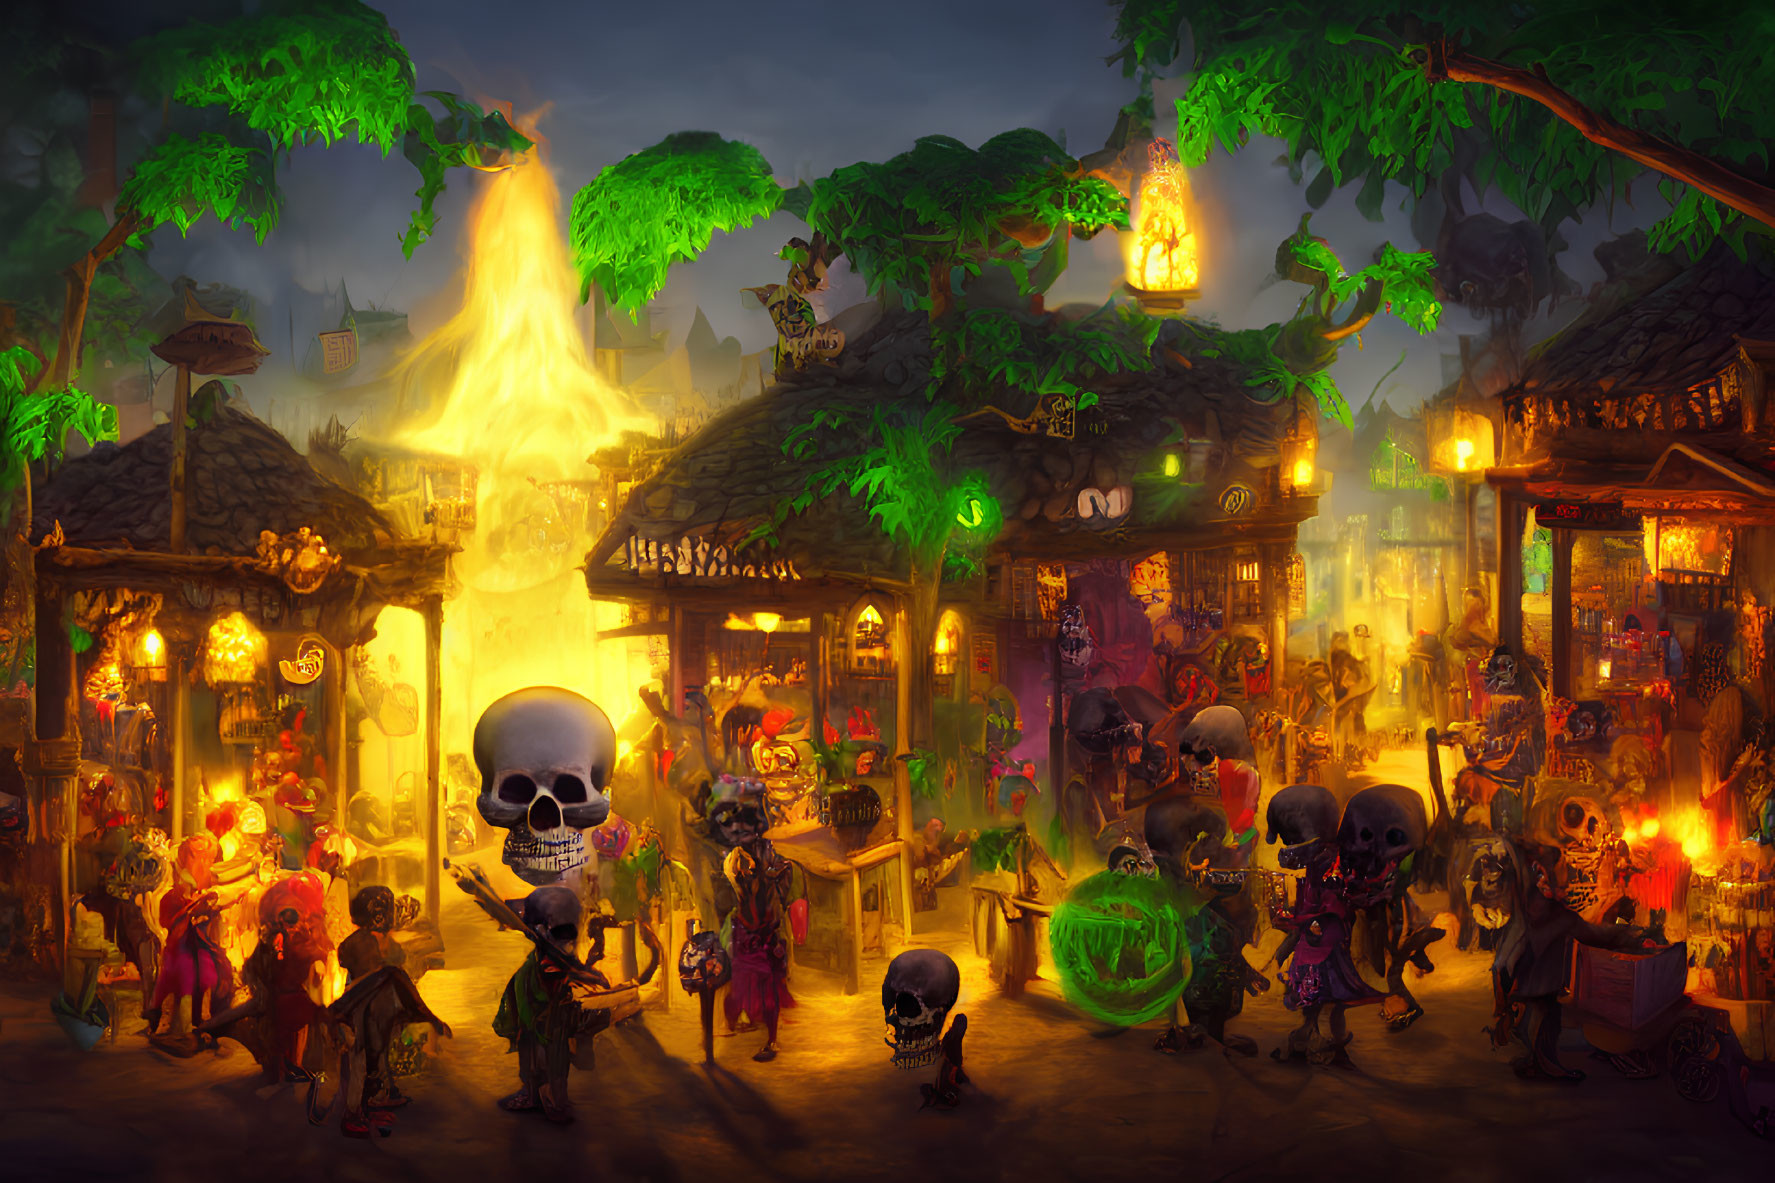 Colorful Night Market Scene with Skeletons Dancing, Lanterns, Skull, and Fire Fountain